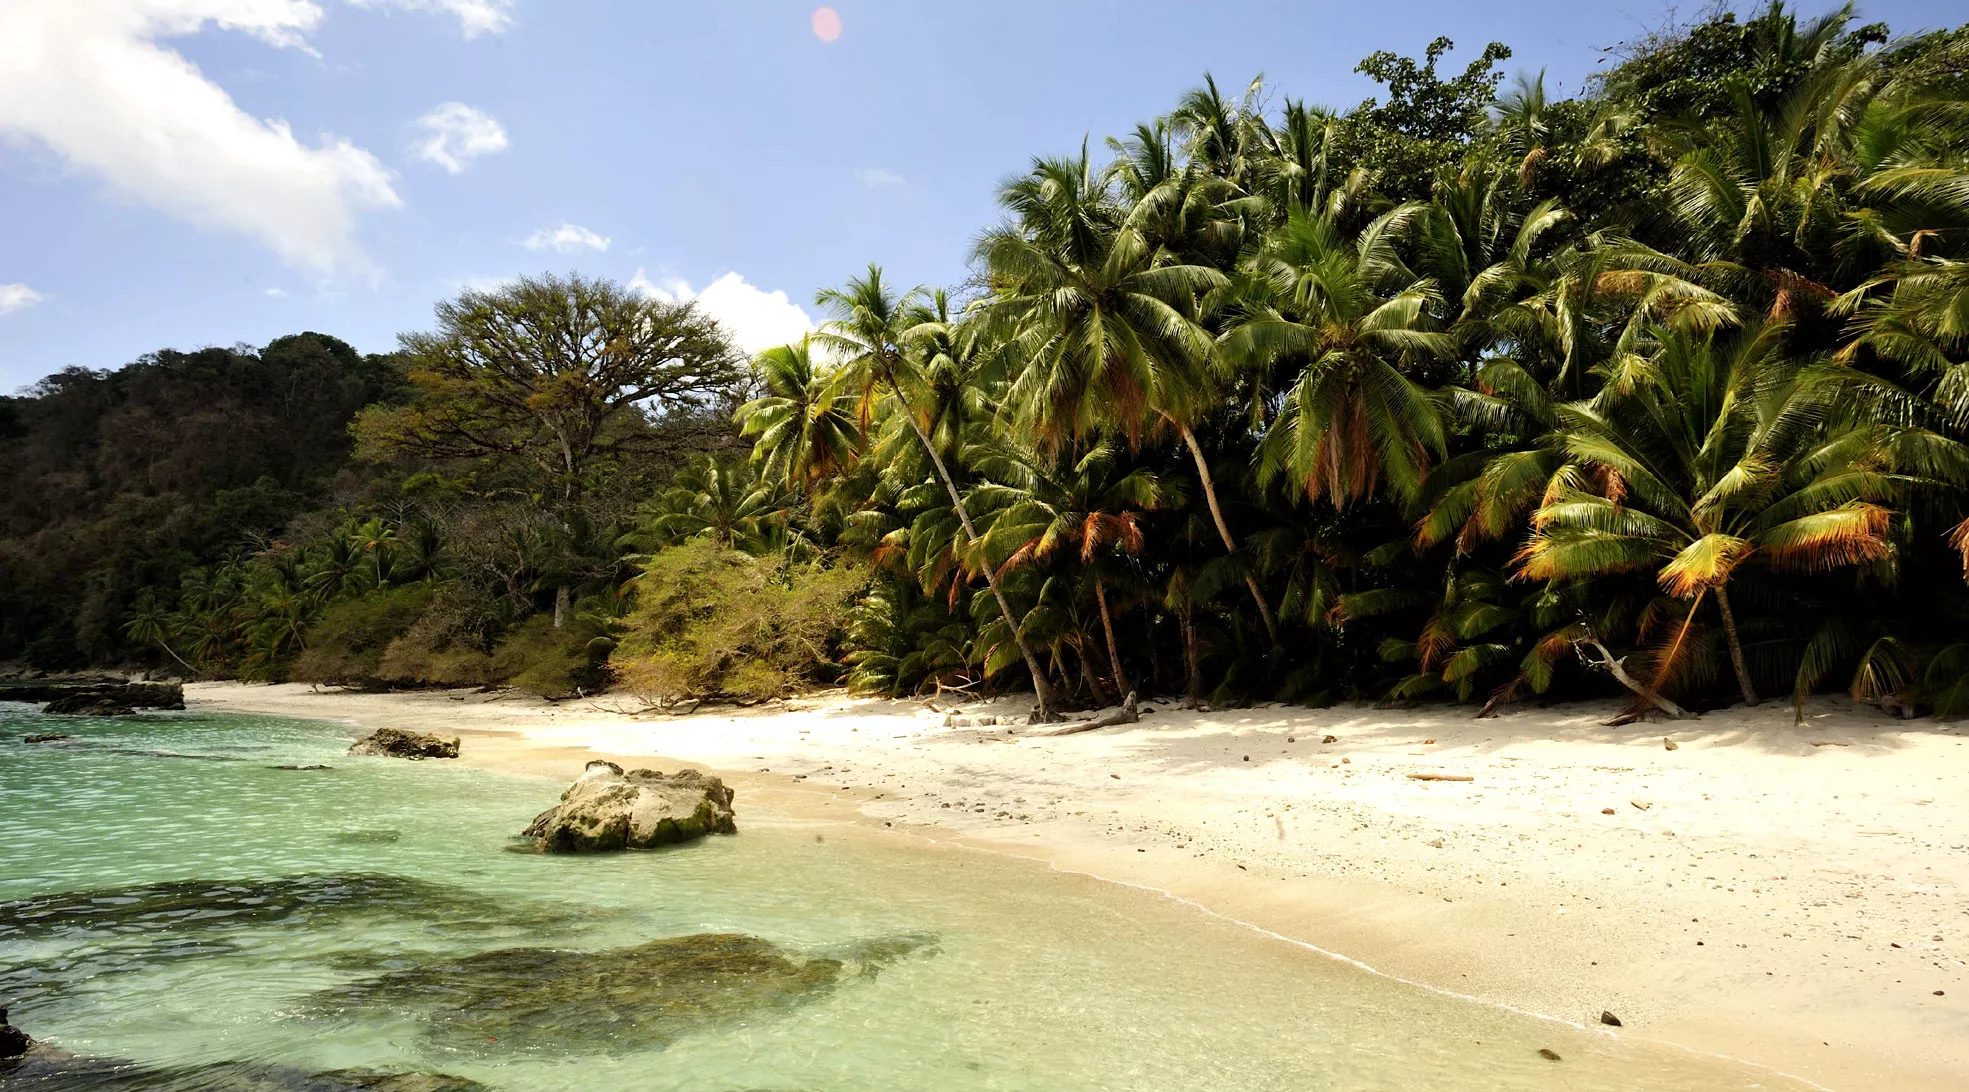 Coiba National Park in Panama, North America | Trekking & Hiking,Snorkelling - Rated 1.2